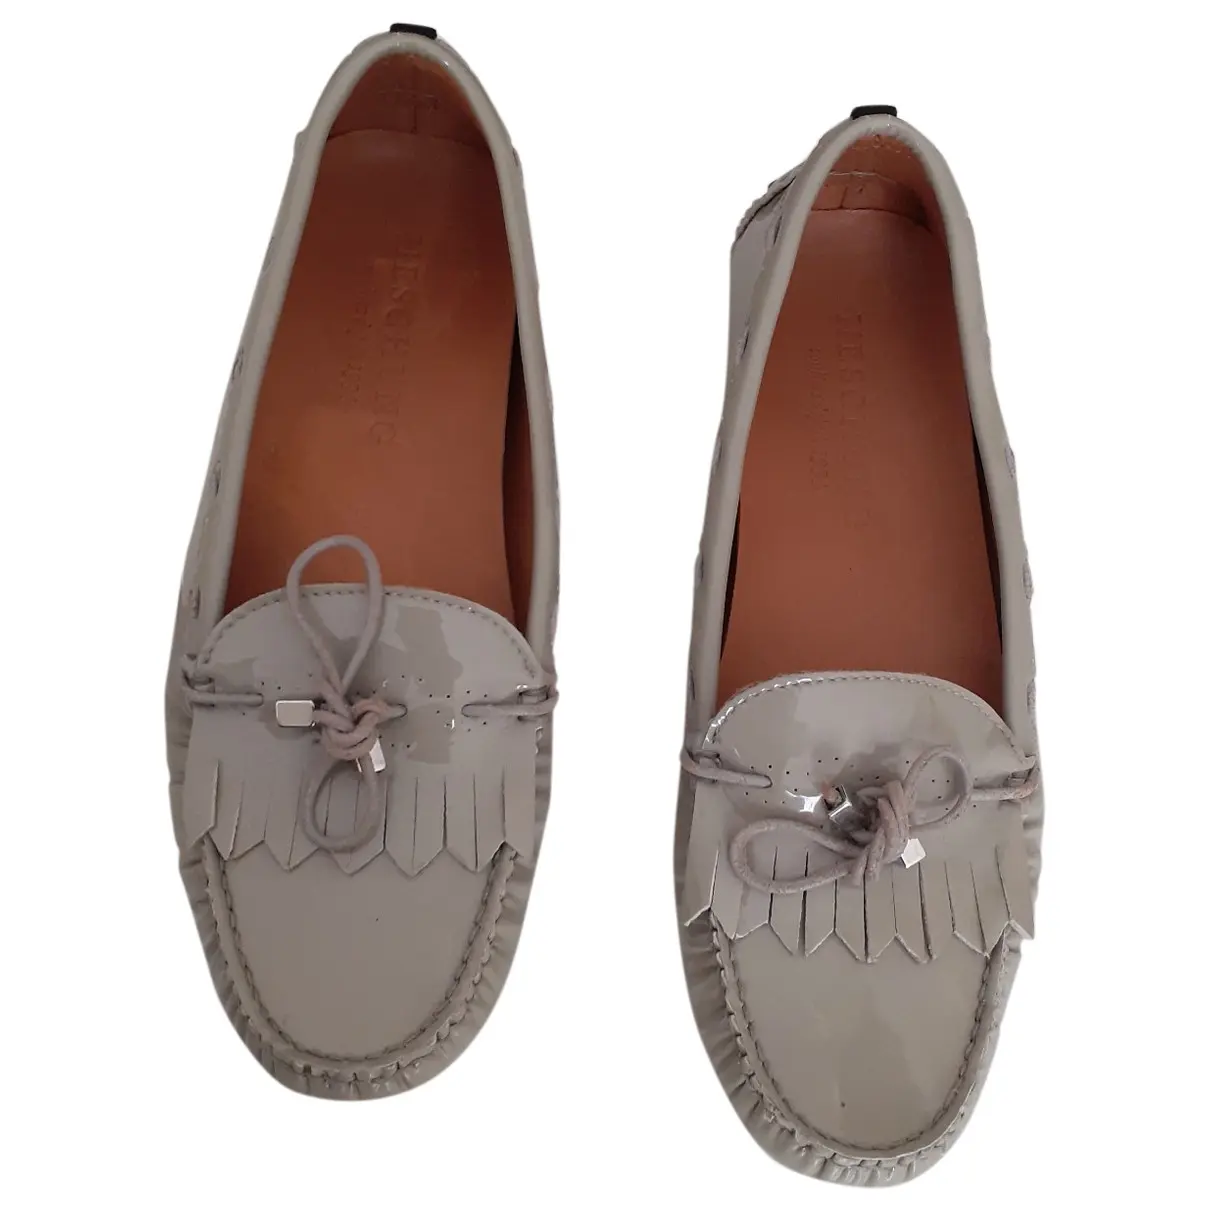 Patent leather flats Heschung